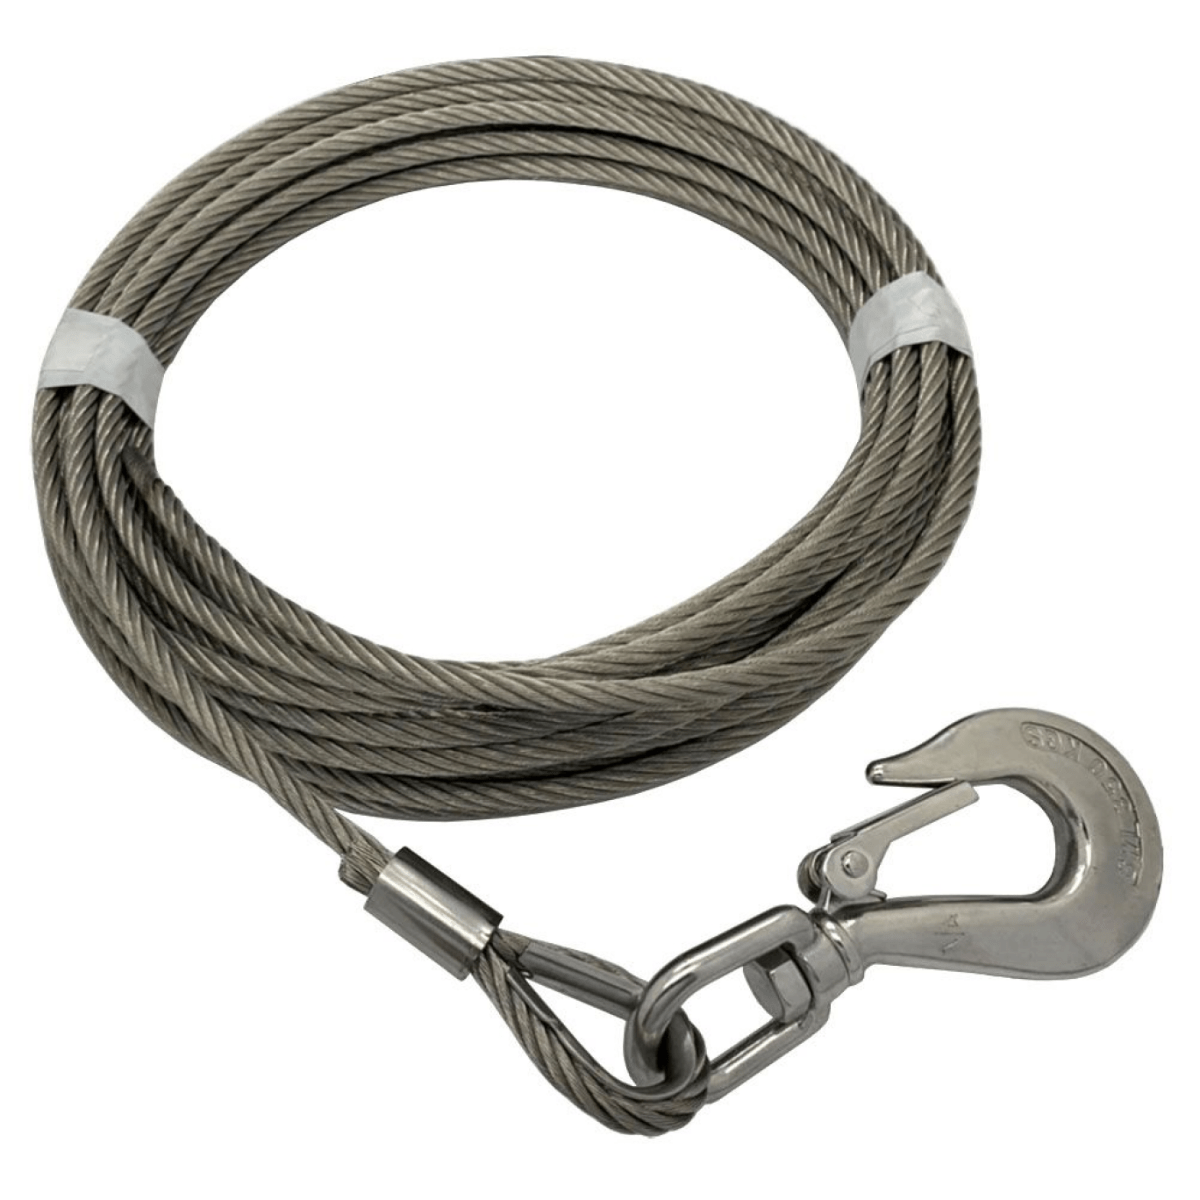 https://icbrindle.com/media/catalog/product/cache/6bbb8cd0d1cbc640265b606c71457640/s/t/stainless_steel_wire_rope_winch_cable_with_hook.png